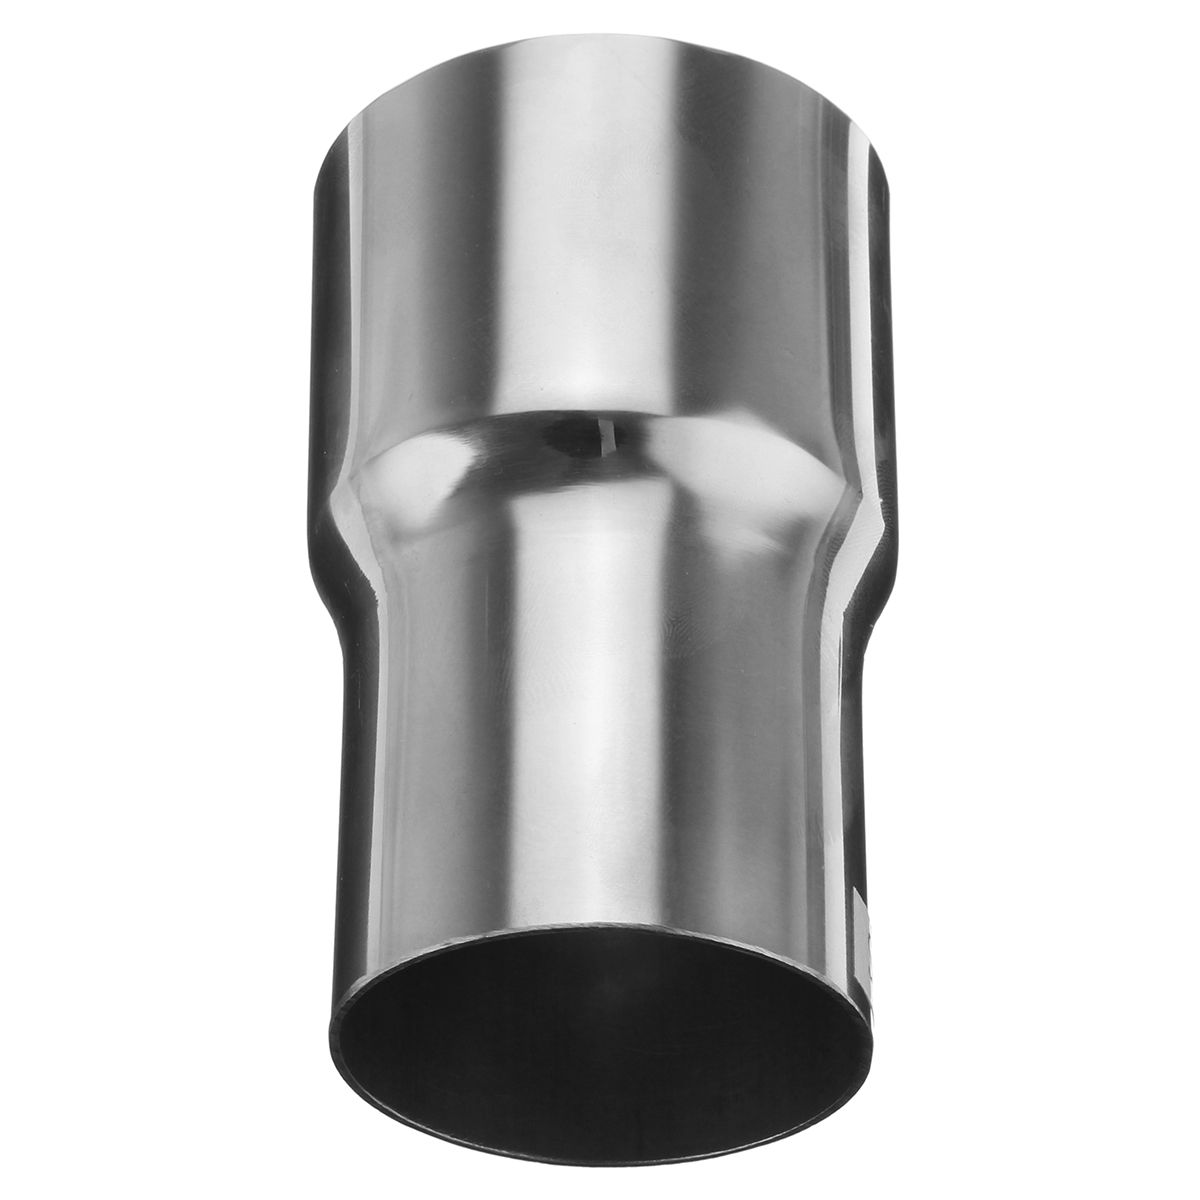 60mm-To-51mm-Mild-Steel-Standard-Adapter-Exhaust-Reducer-Connector-Pipe-Tube-1214217